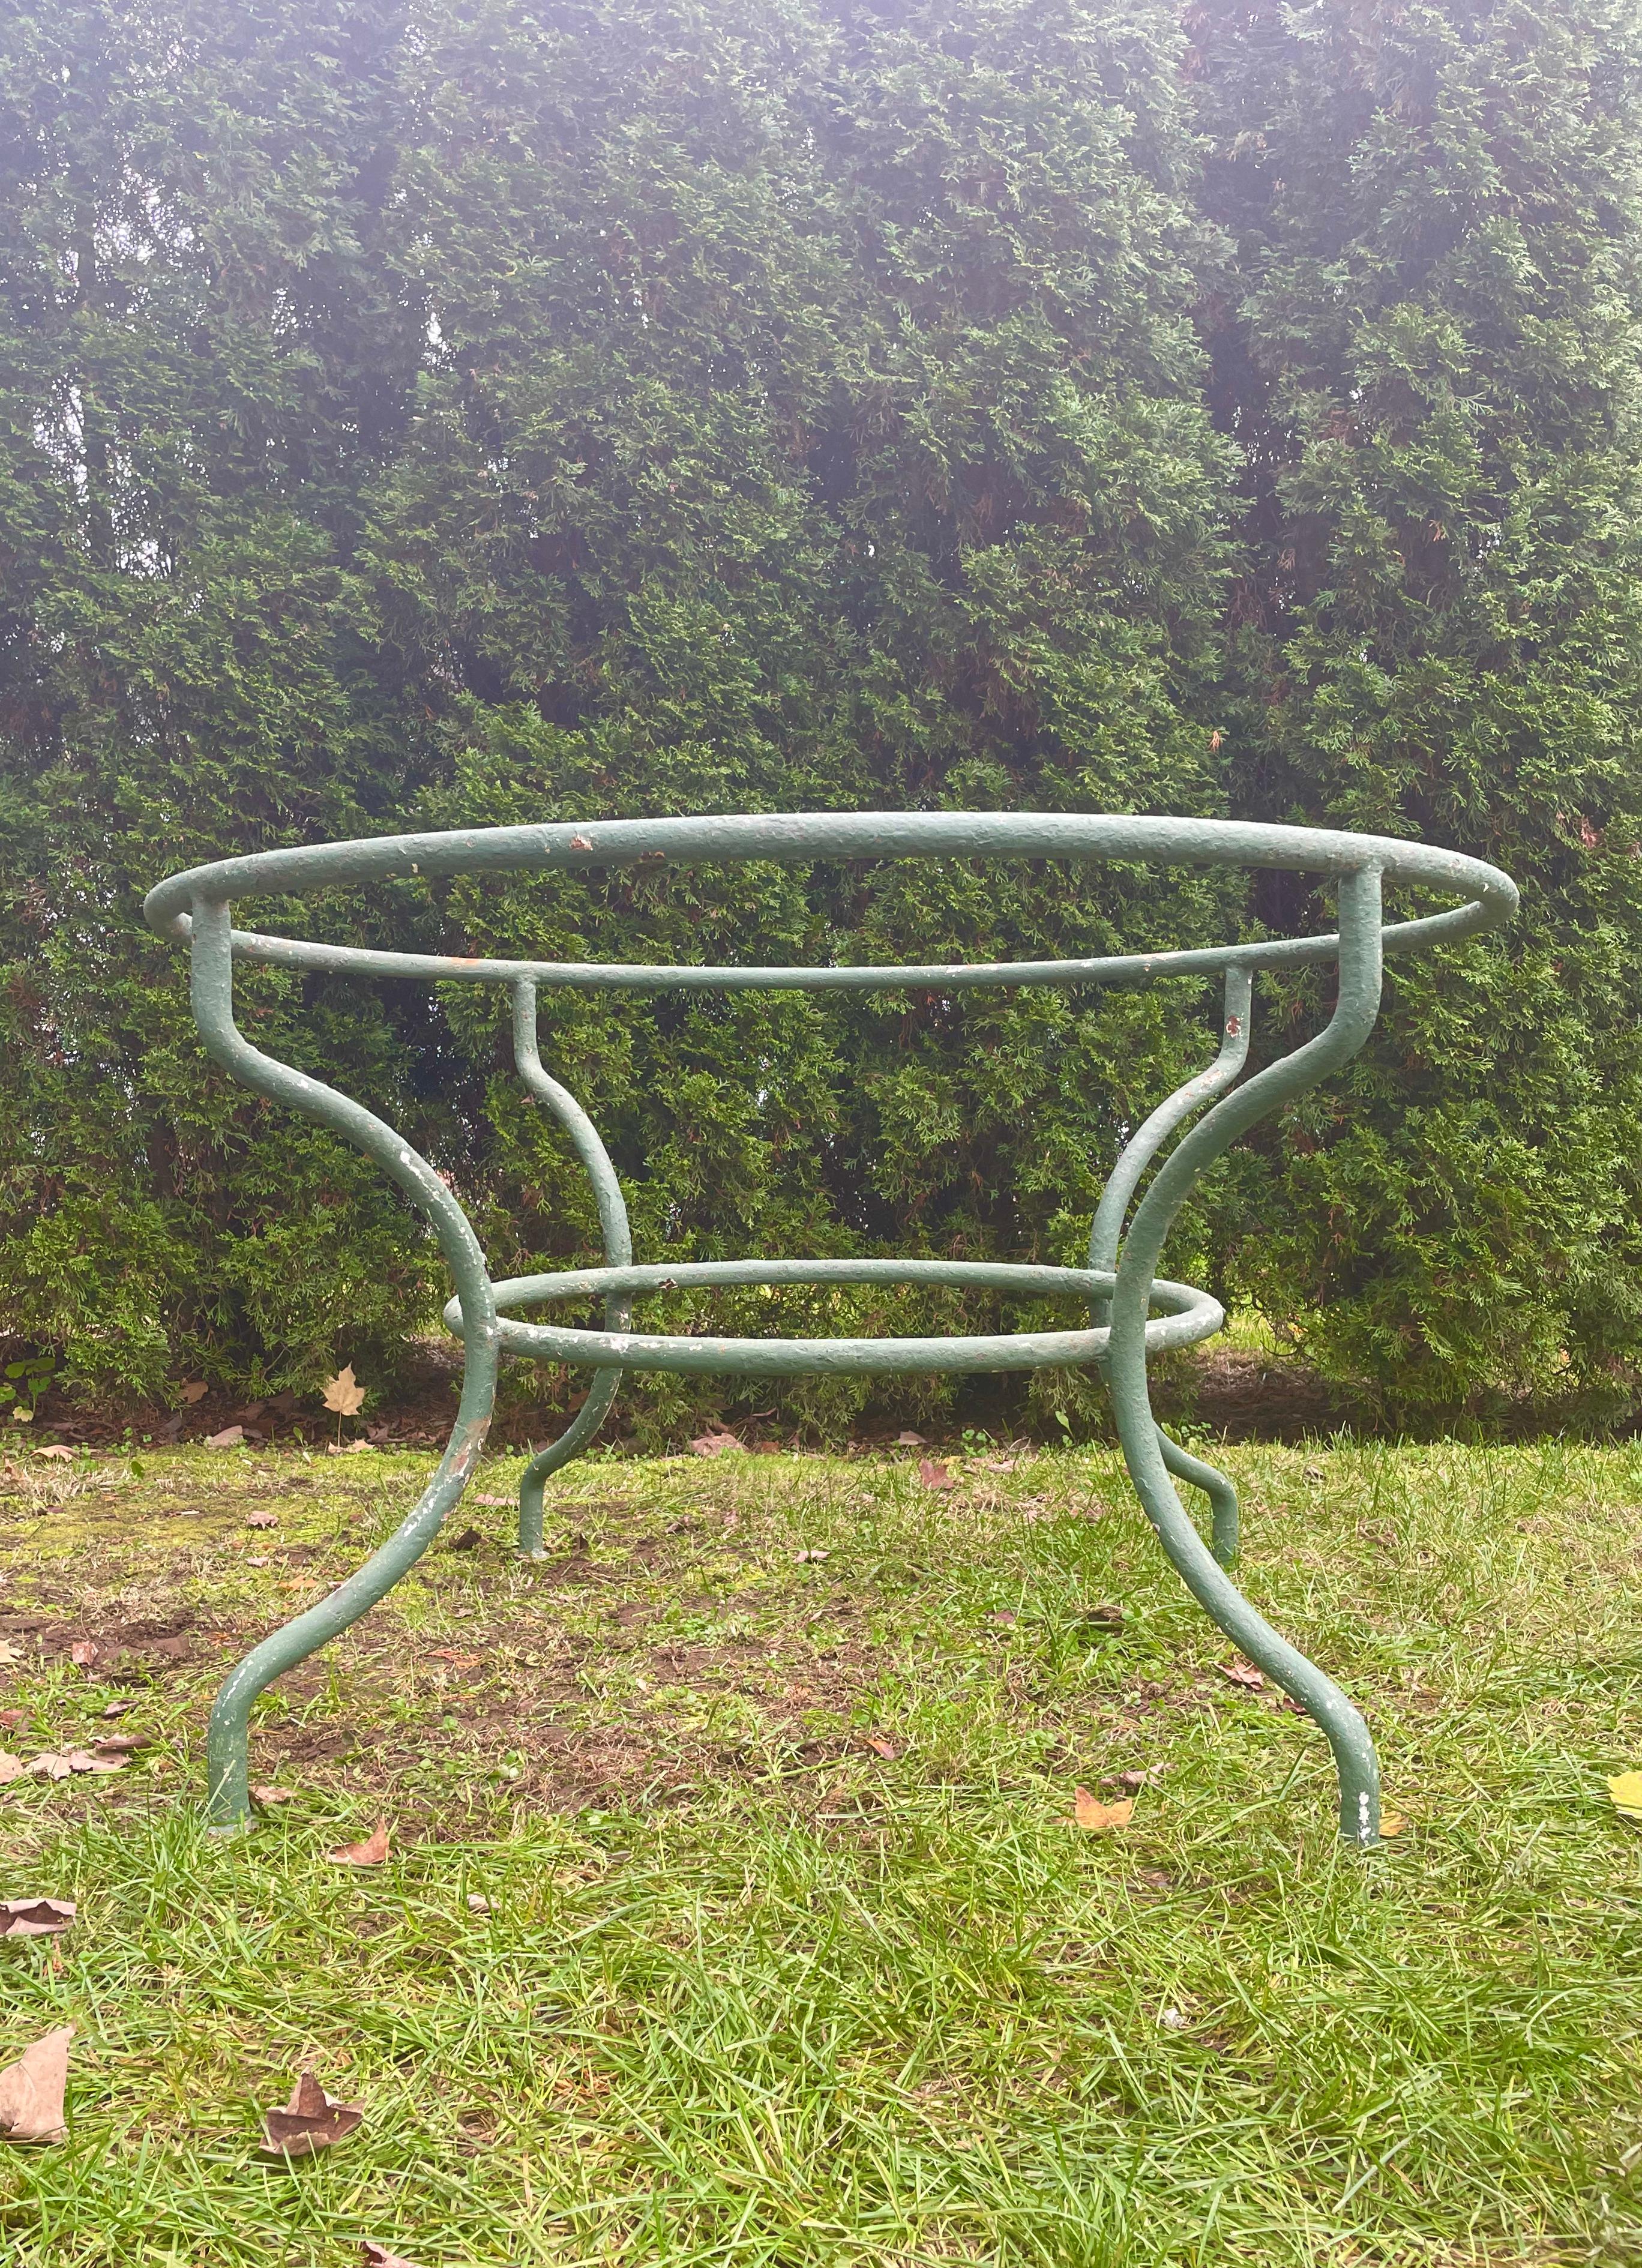 We buy good table bases whenever we can and these are a pair of lovely ones, although we are selling them separately. Made of tubular steel with gracefully-curving legs, they would make wonderful dining tables on your terrace or in the garden. Top